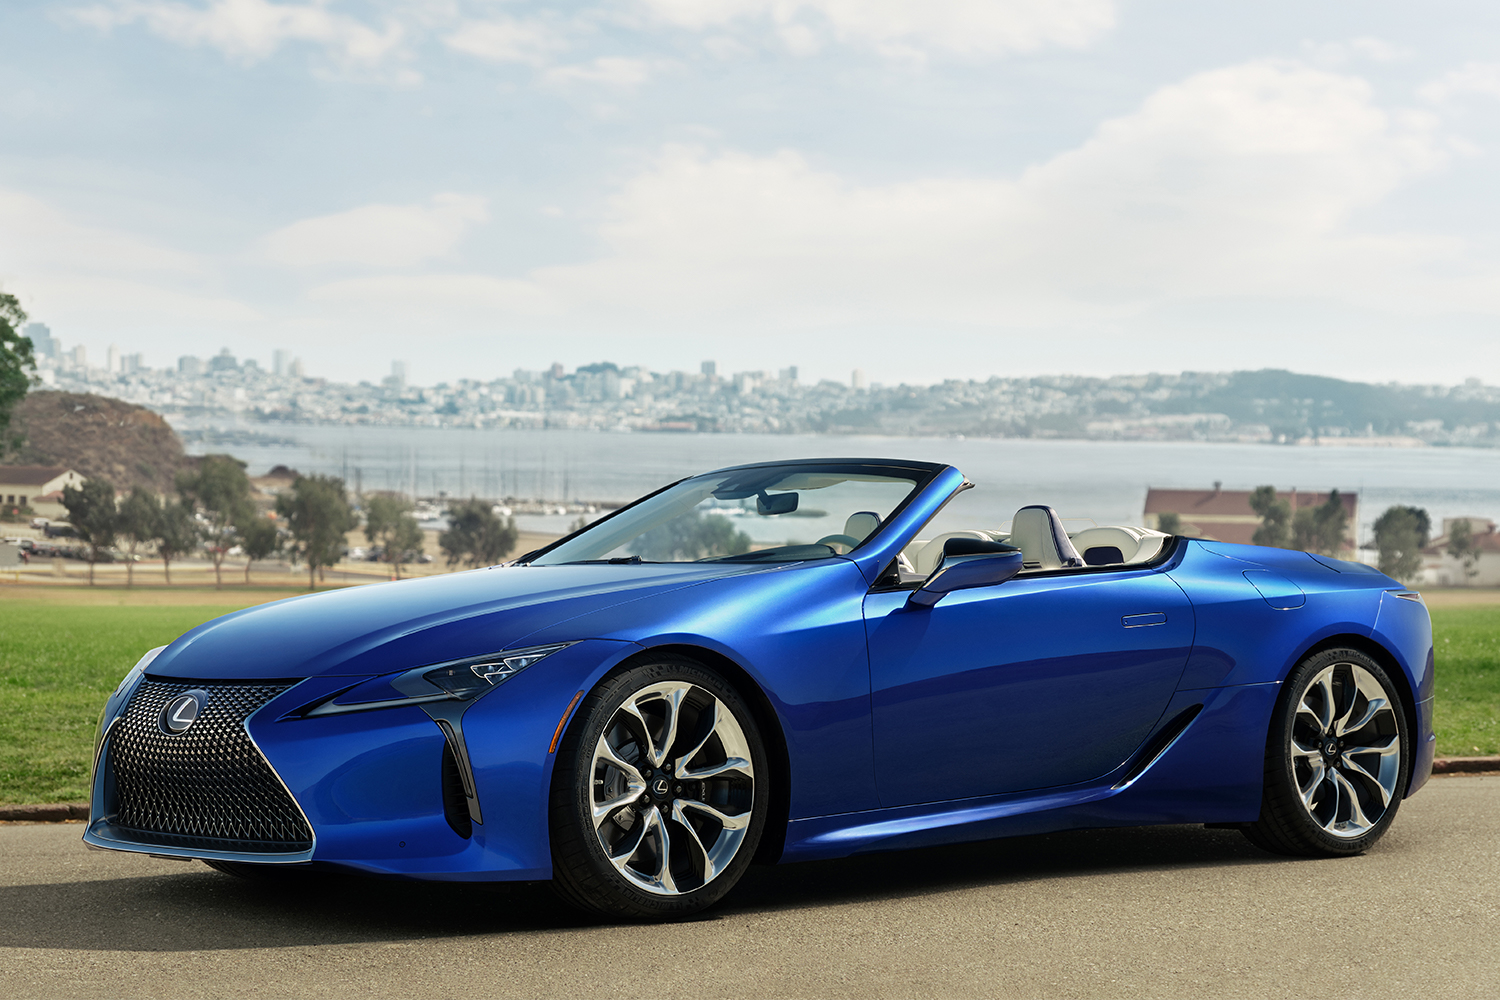 The Lexus LC 500 Convertible, one of our favorite vehicles of 2021